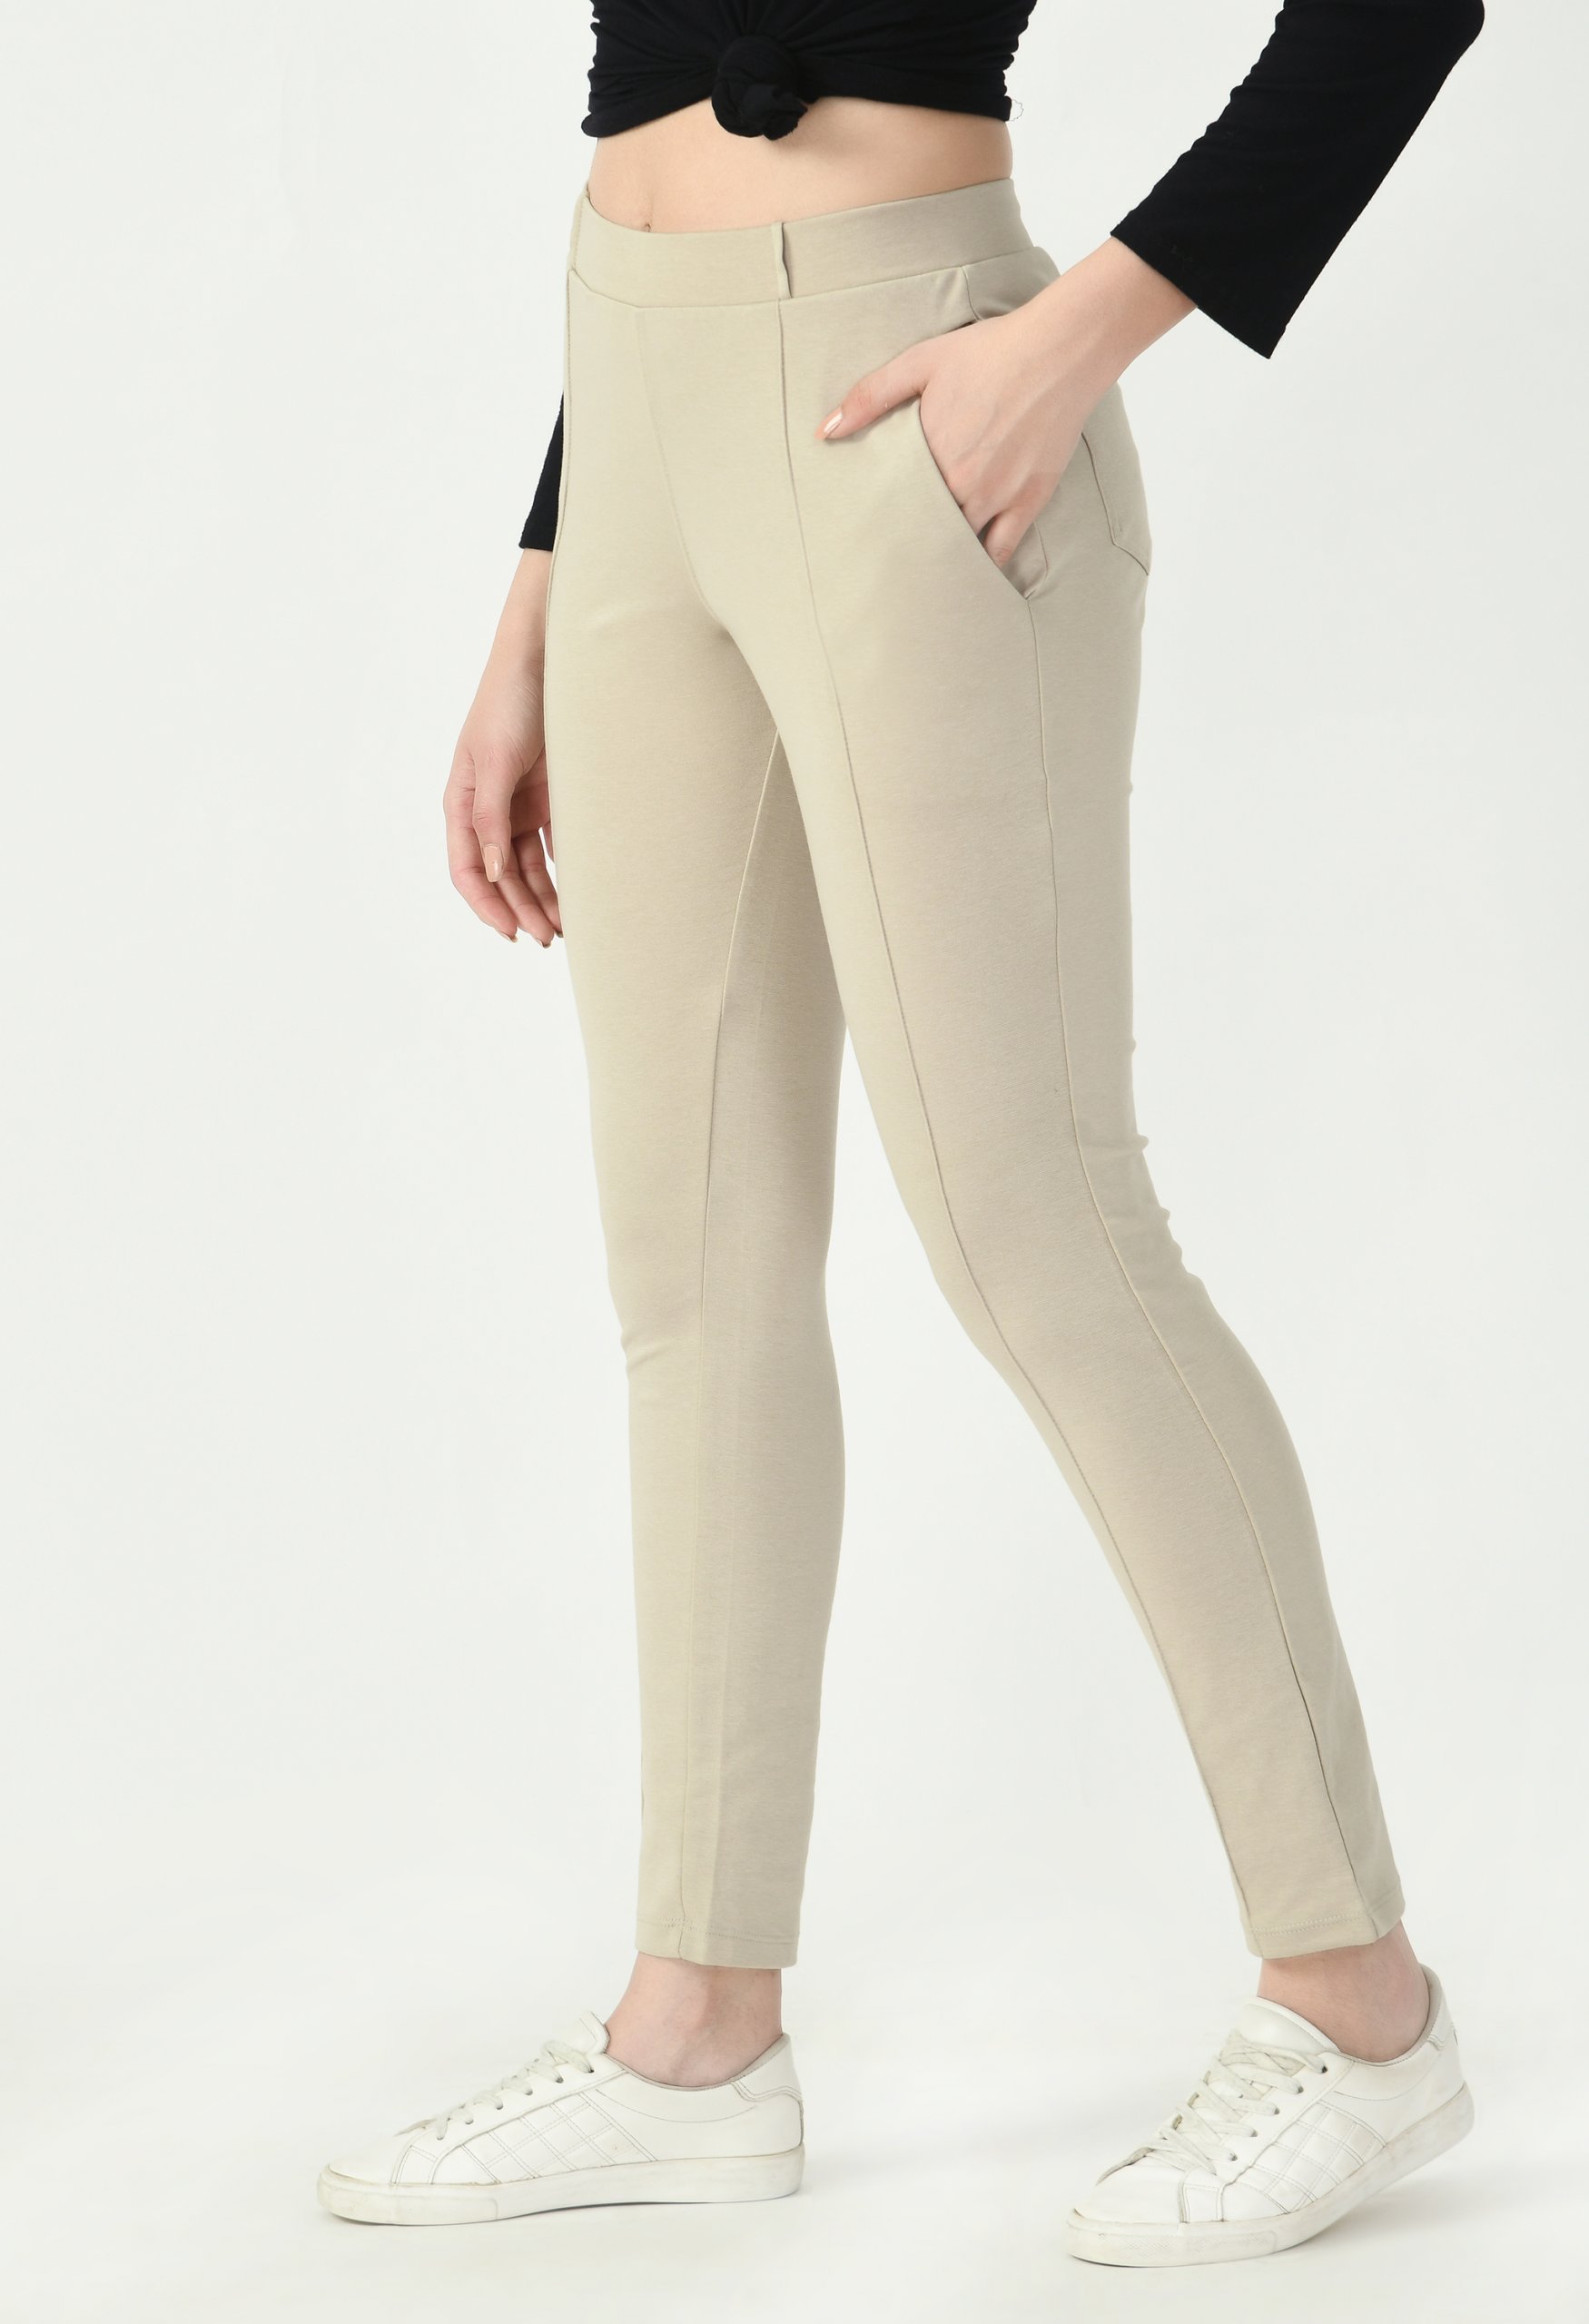 Yellow Coloured Trouser by Deerdo